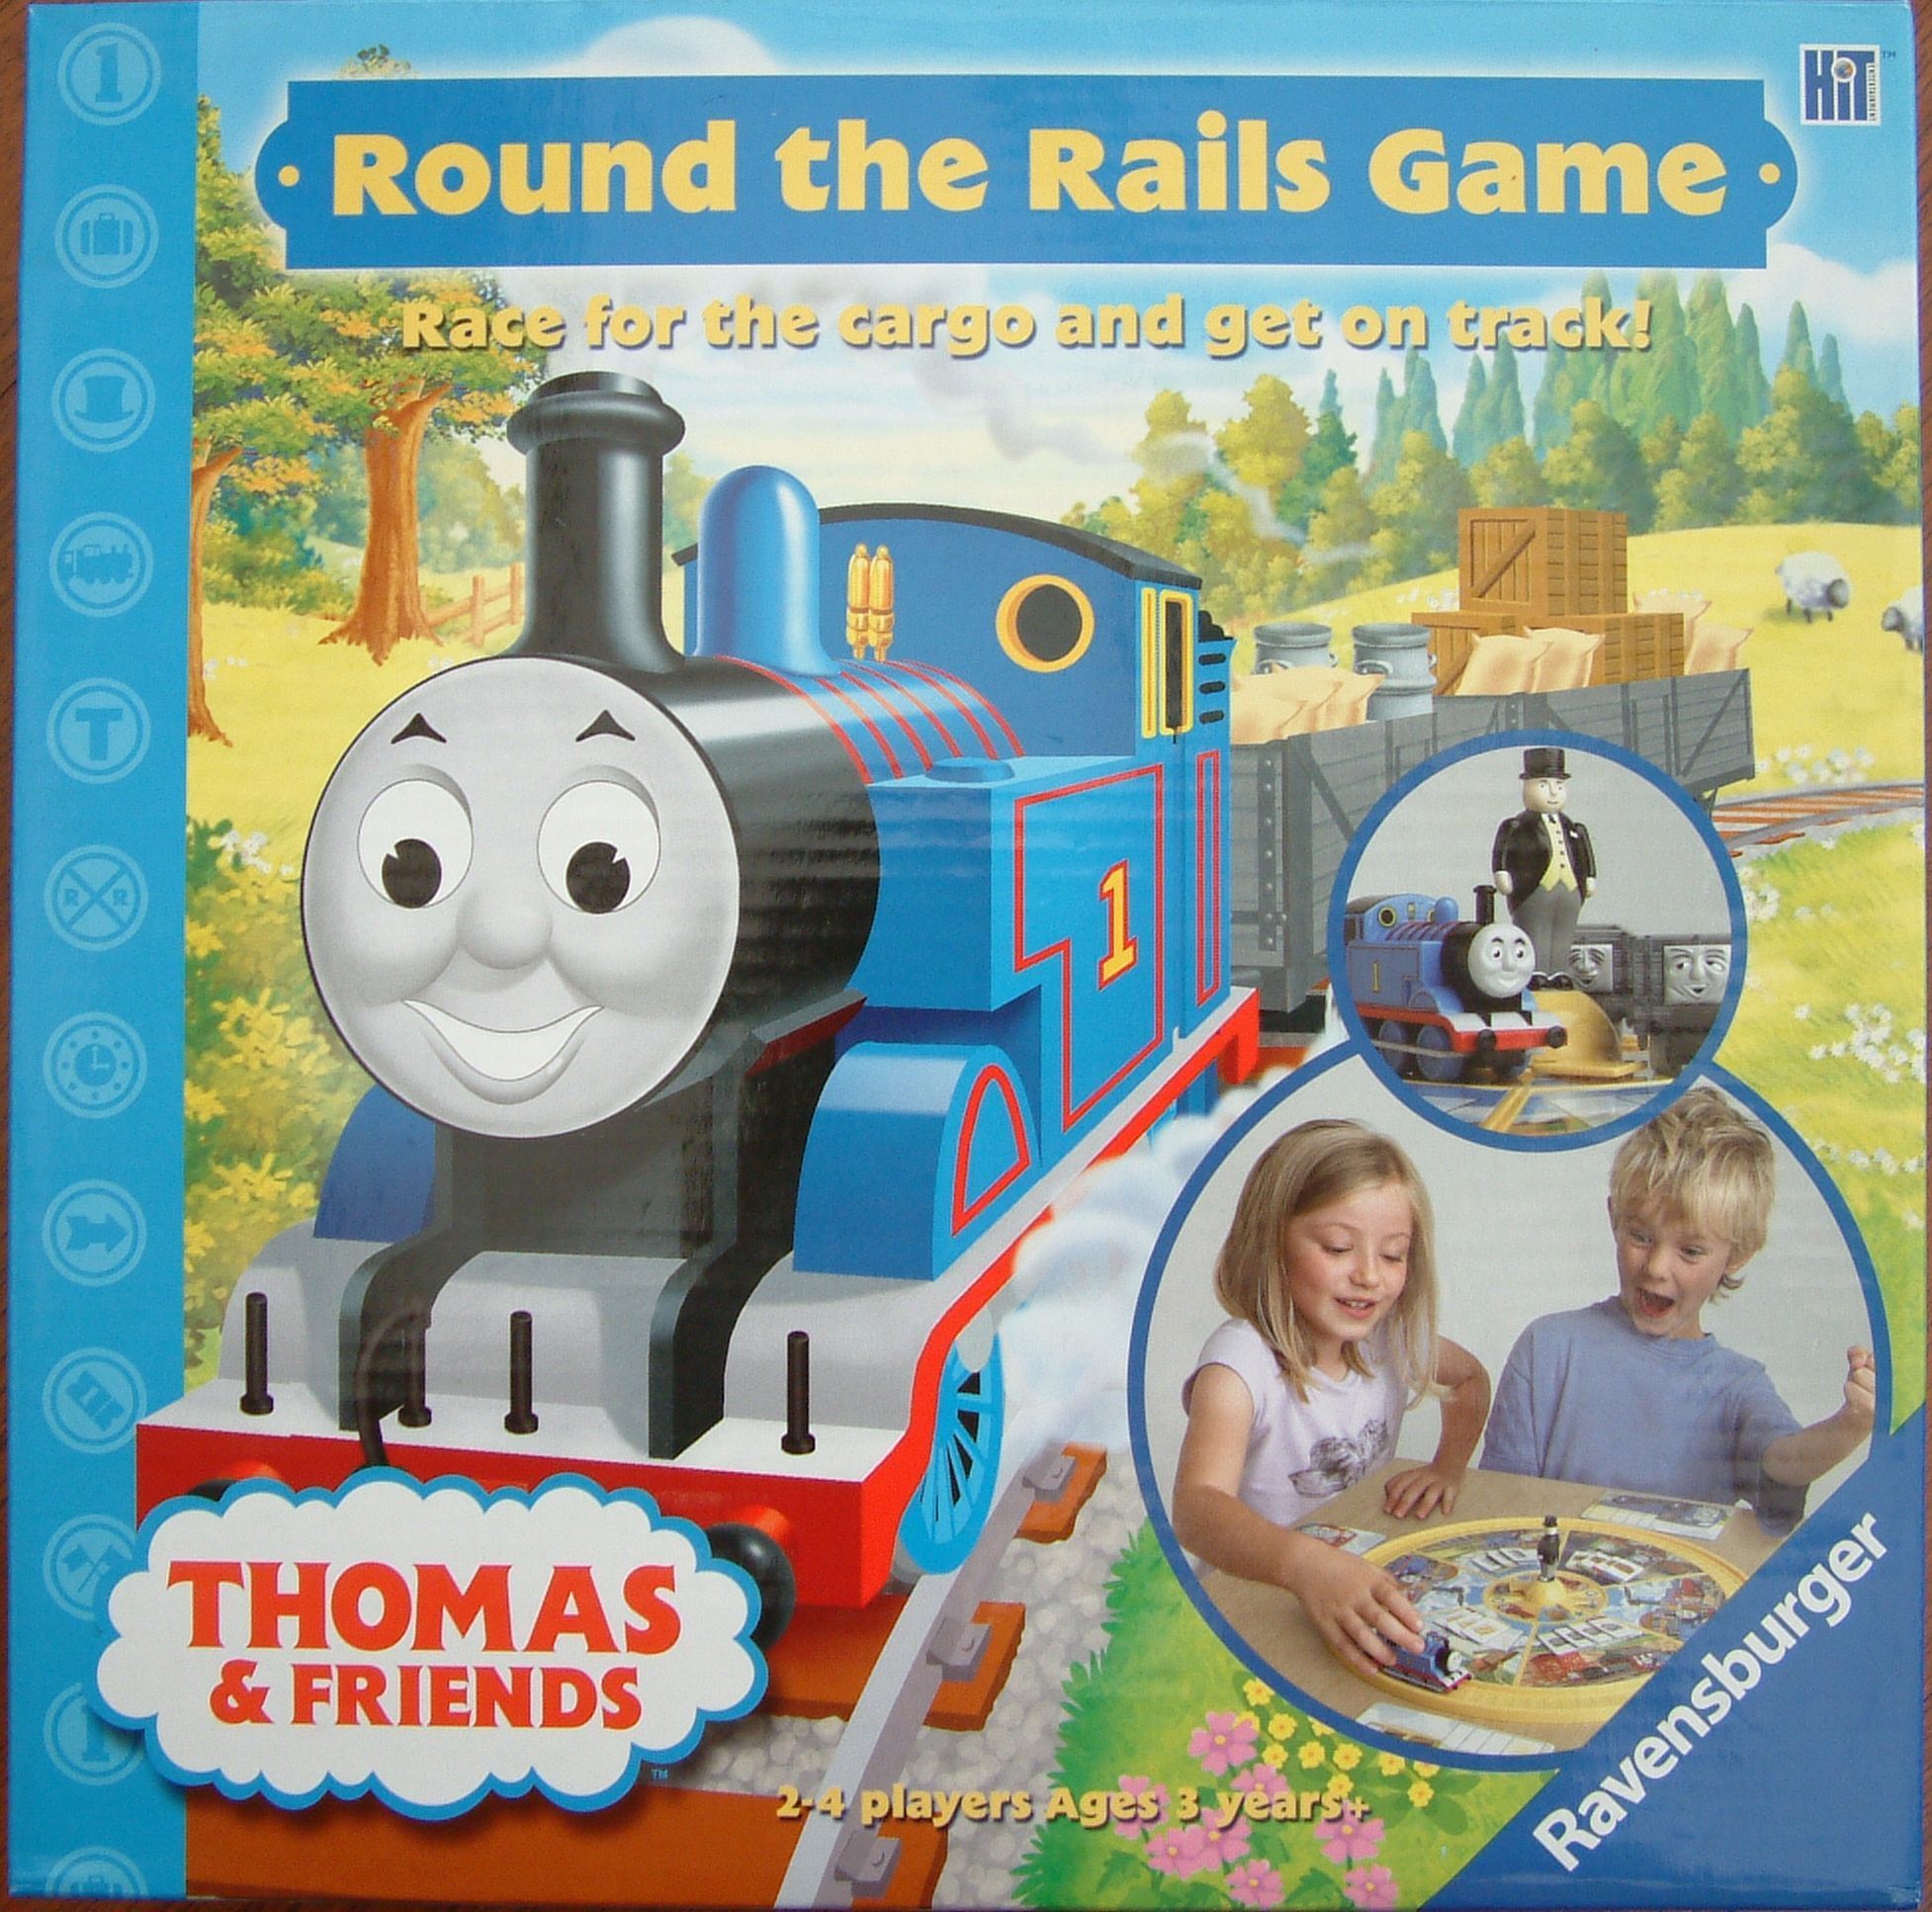 Round the Rails Game